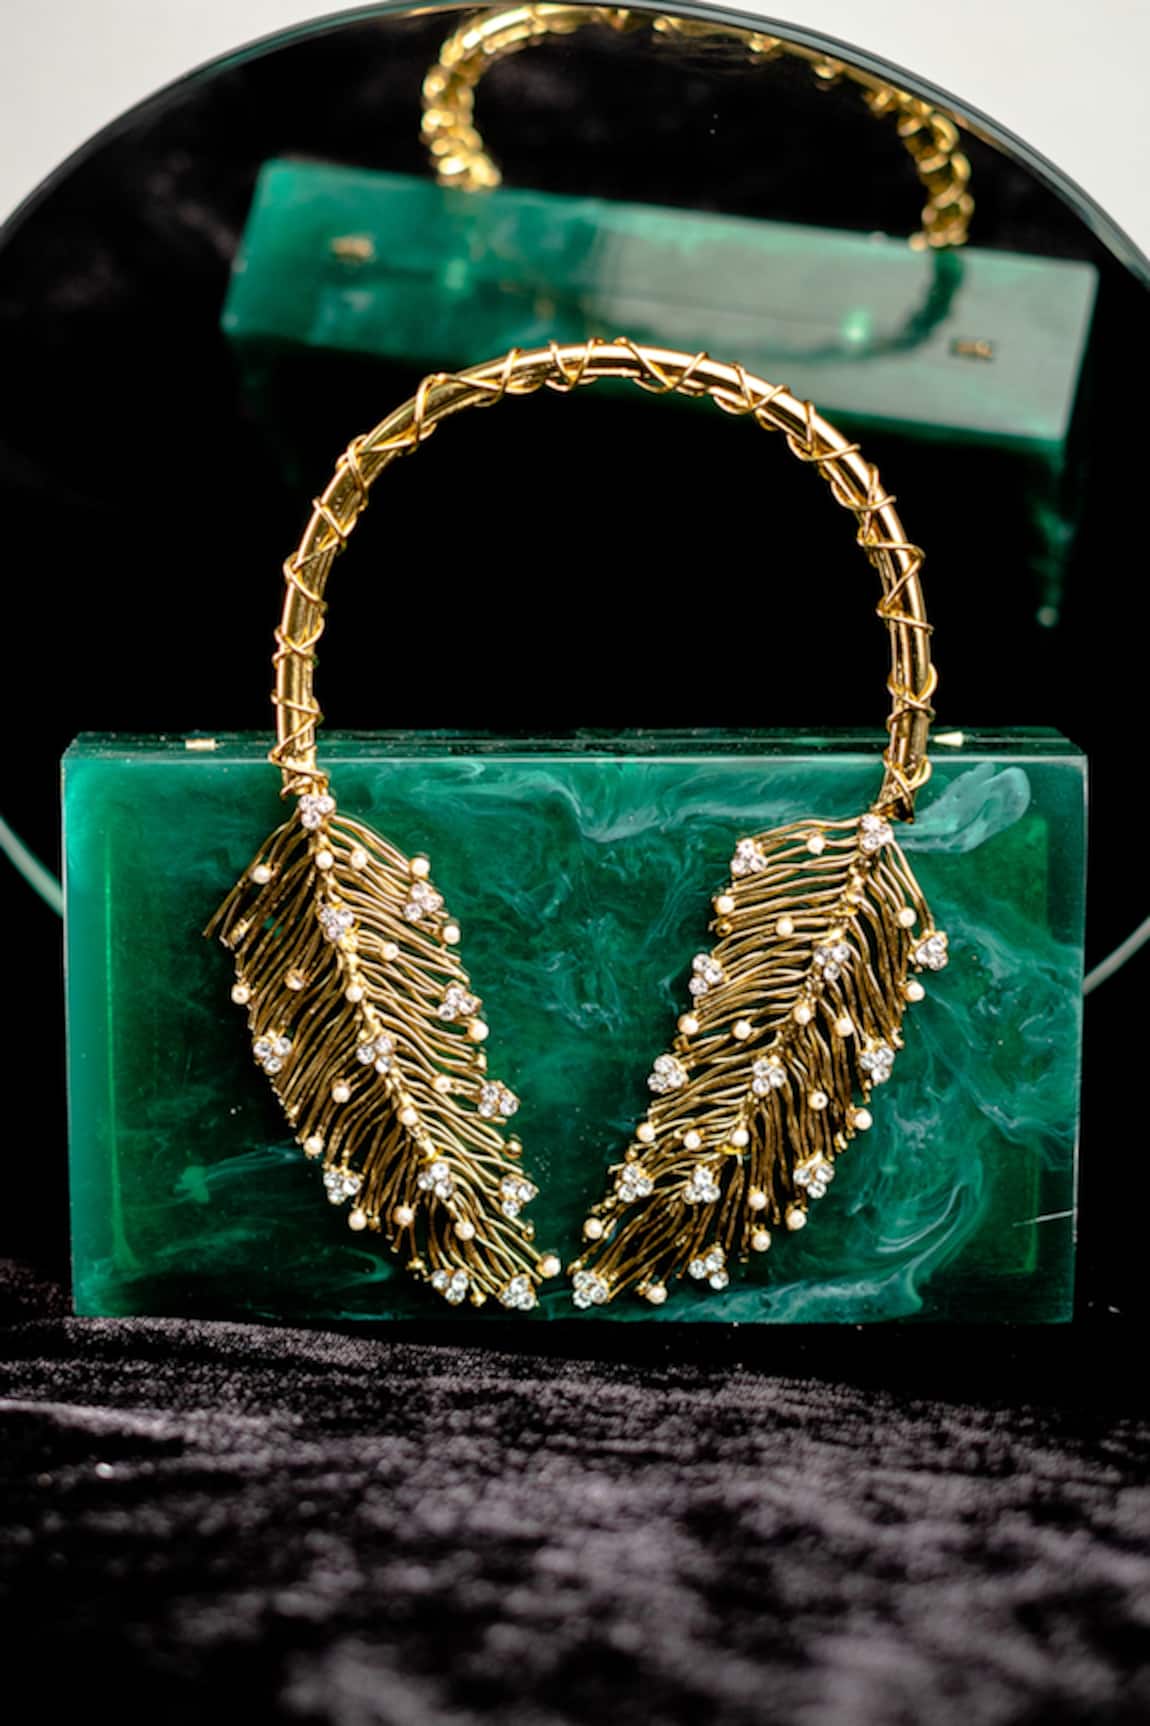 NR BY NIDHI RATHI Resin Feather Carved Clutch Bag